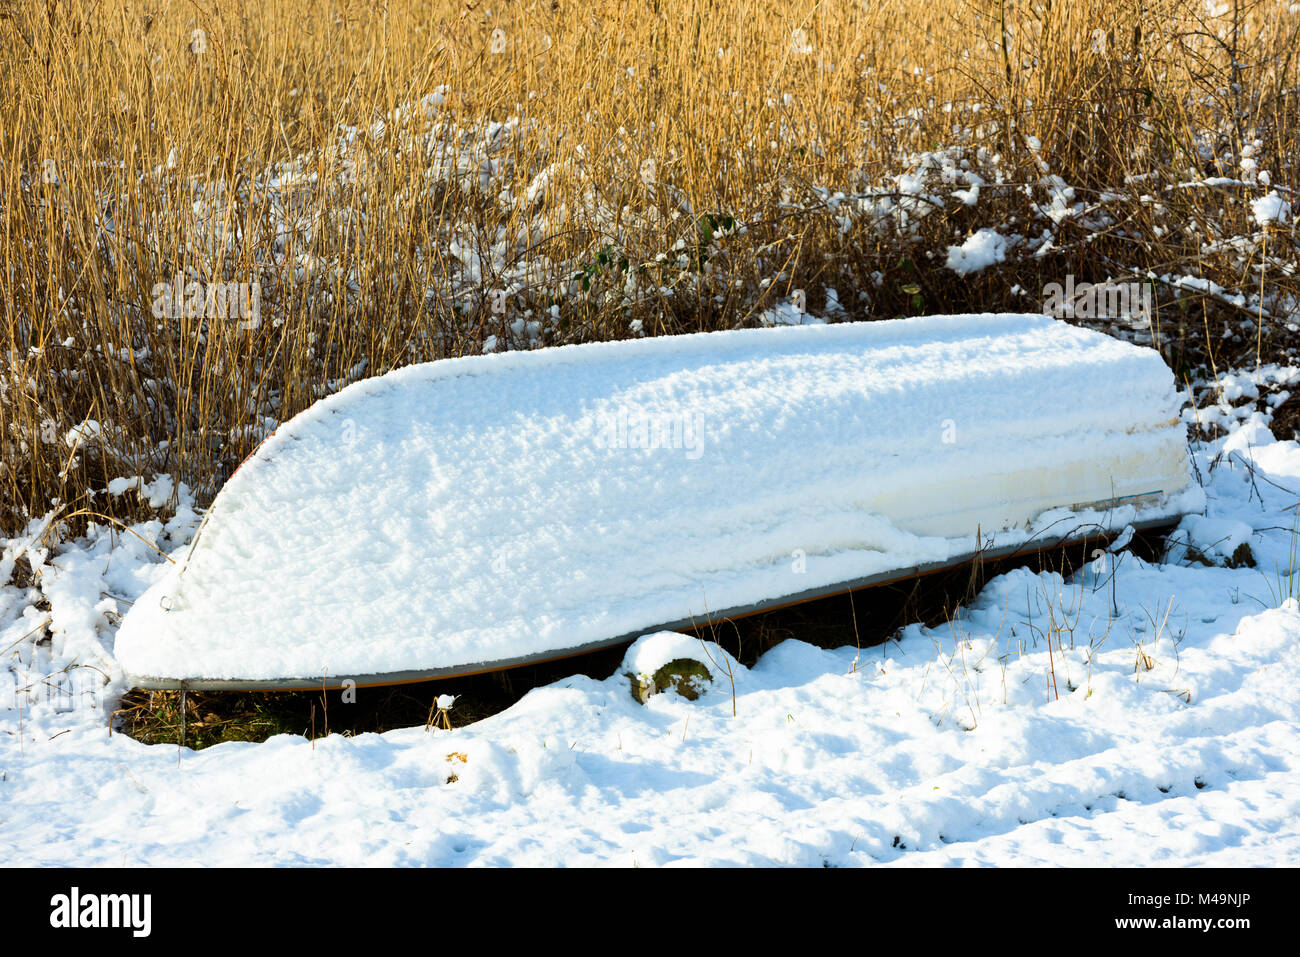 Upside down recreational boat on land covered with thin layer of snow. Reed in background. Stock Photo